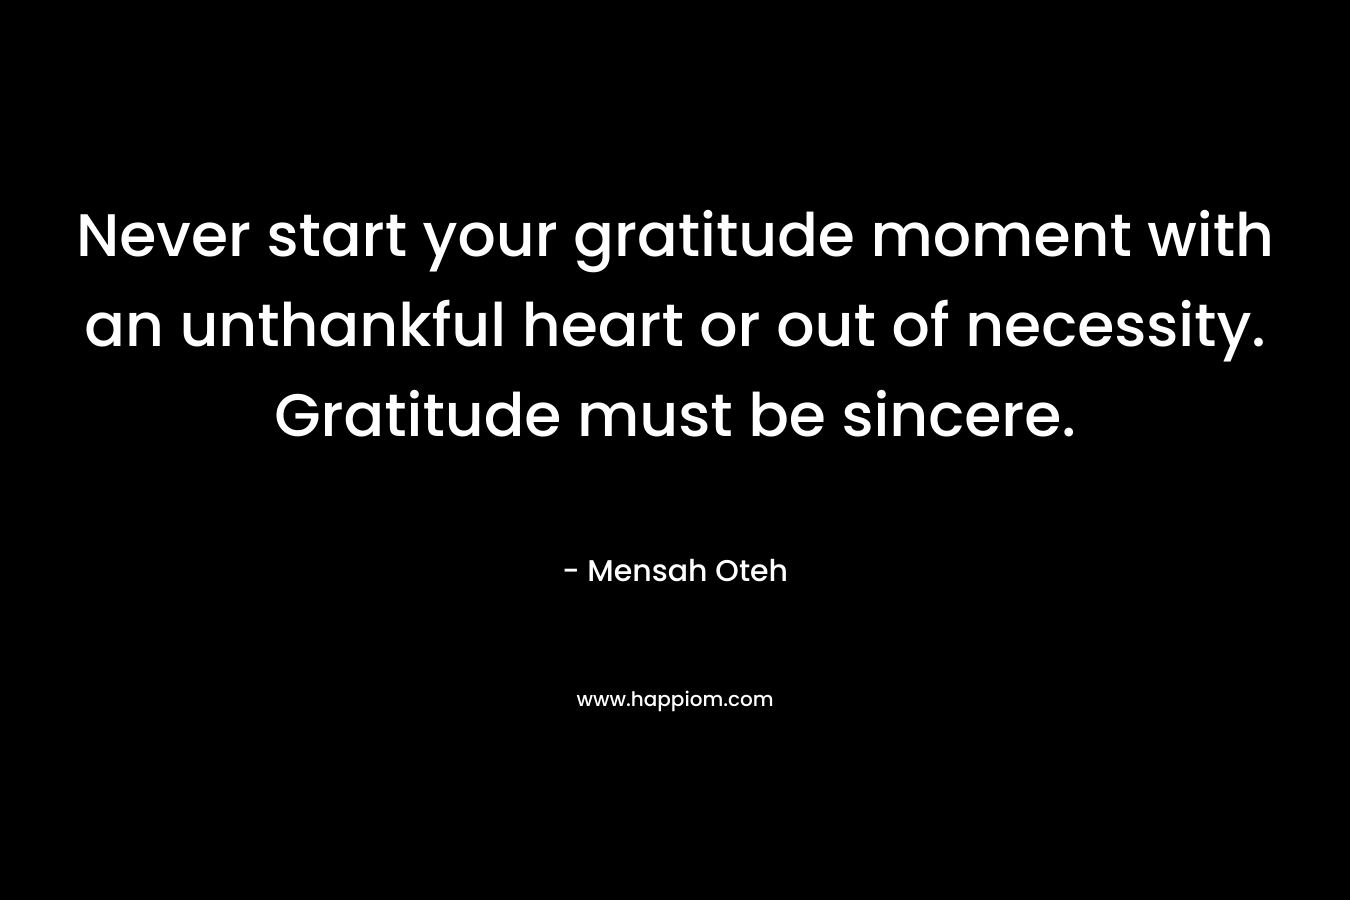 Never start your gratitude moment with an unthankful heart or out of necessity. Gratitude must be sincere.